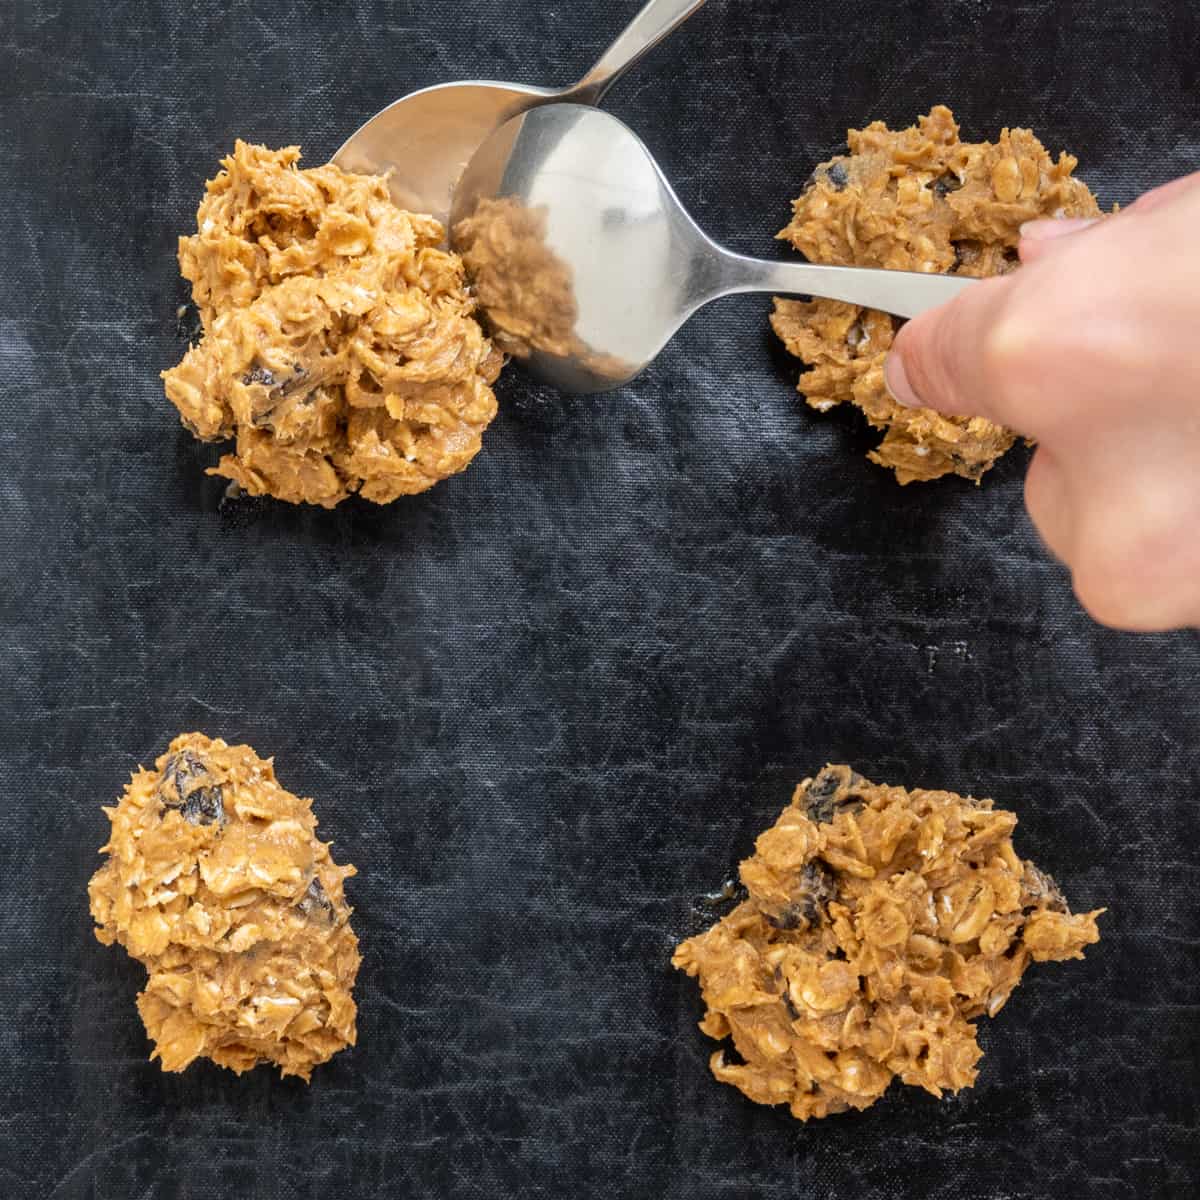 Scoops of the sticky cookie dough are placed on a lined baking tray using two tablespoons.